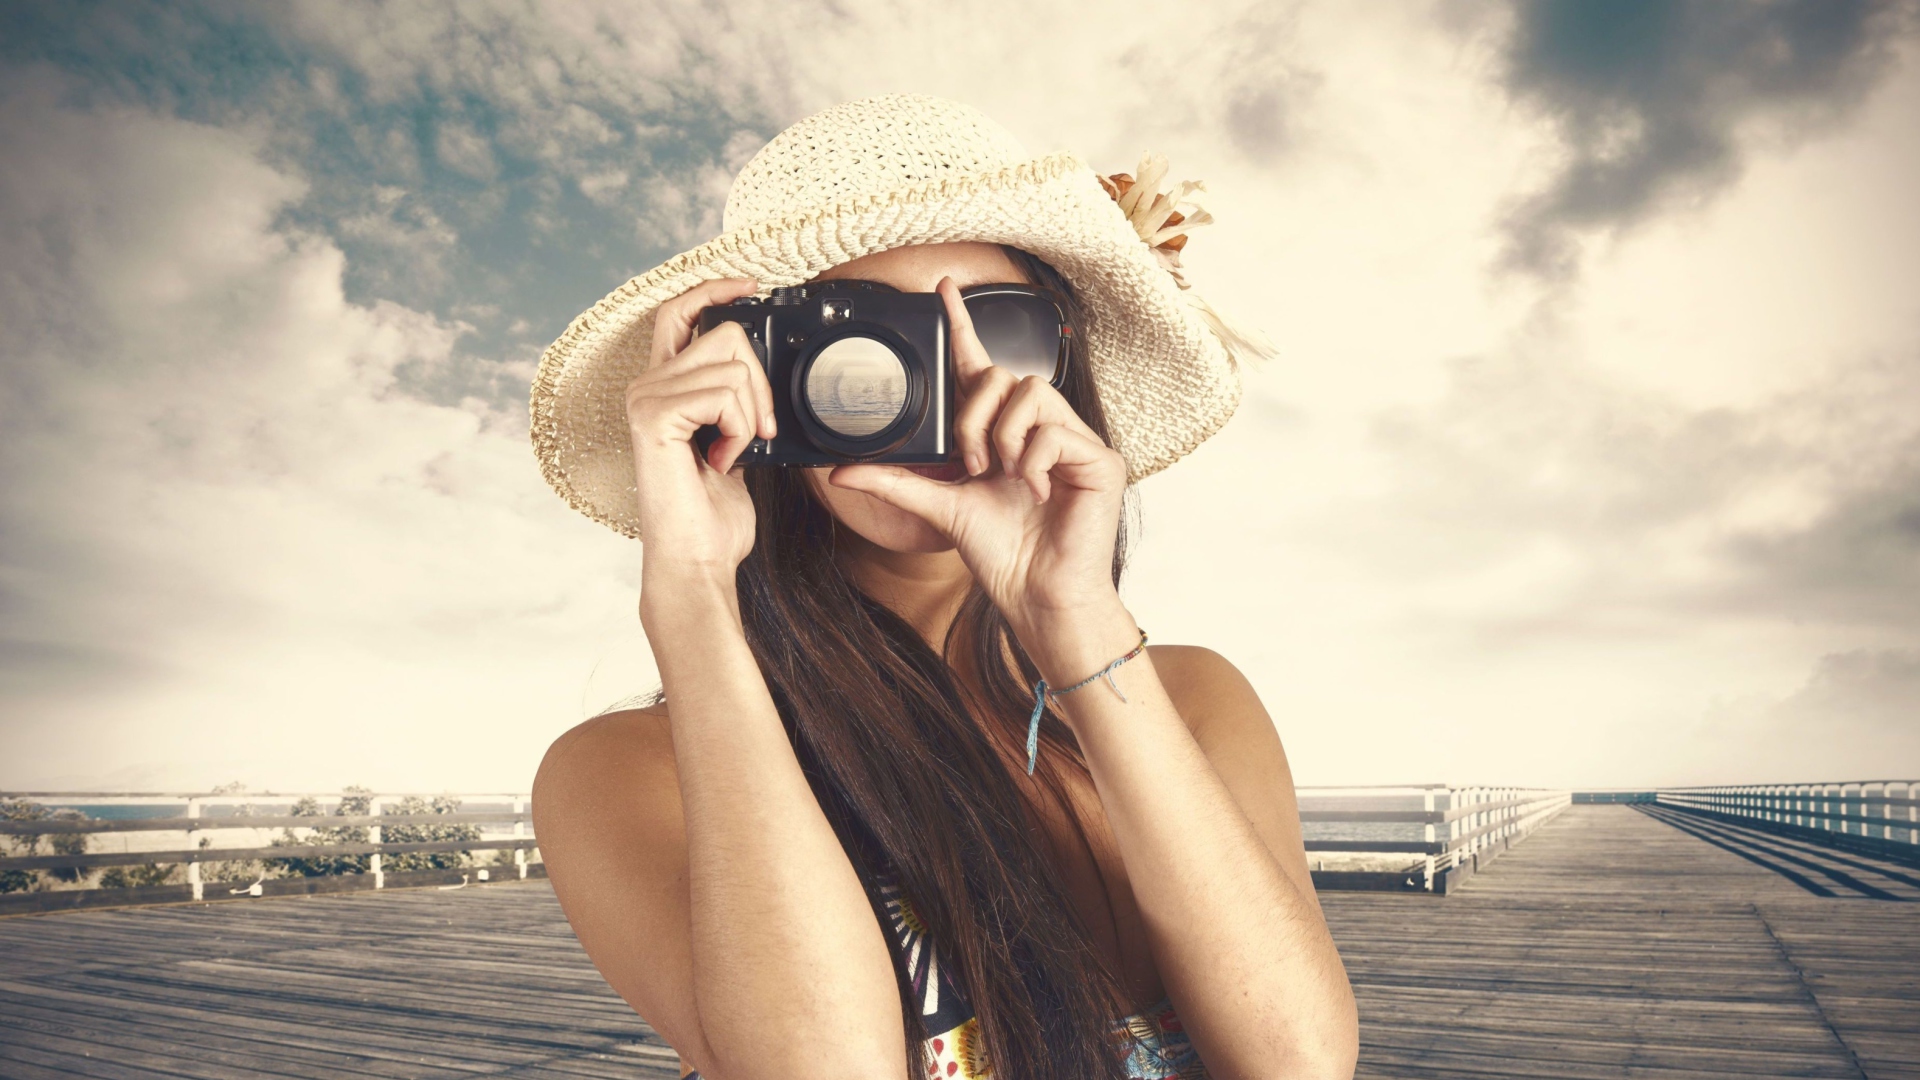 Cute Photographer In Straw Hat wallpaper 1920x1080